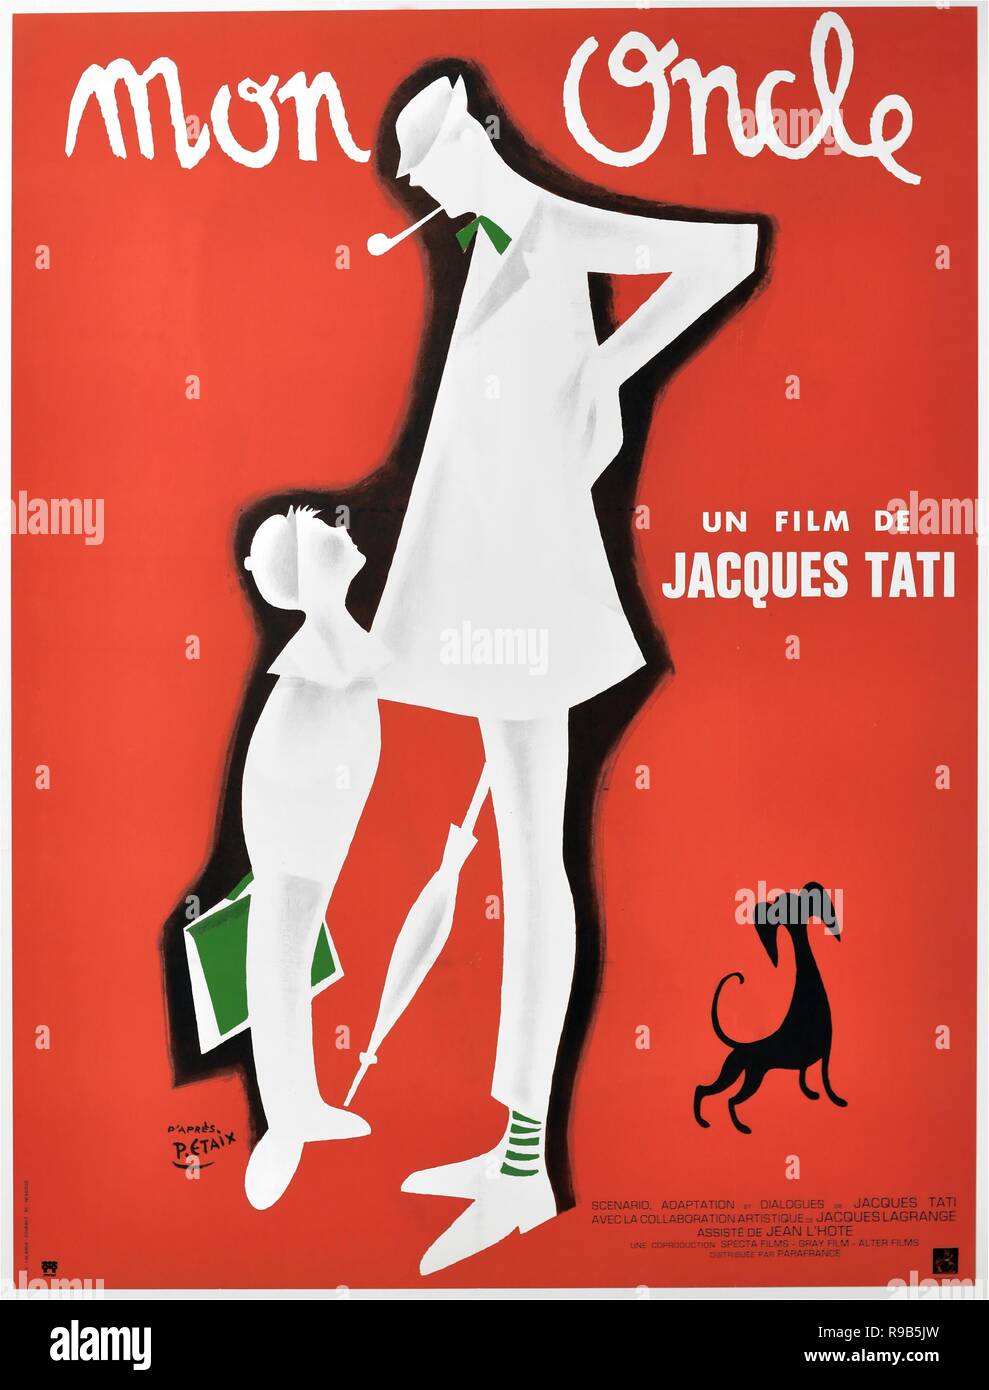 Original film title: MON ONCLE. English title: MY UNCLE. Year: 1958.  Director: JACQUES TATI Stock Photo - Alamy